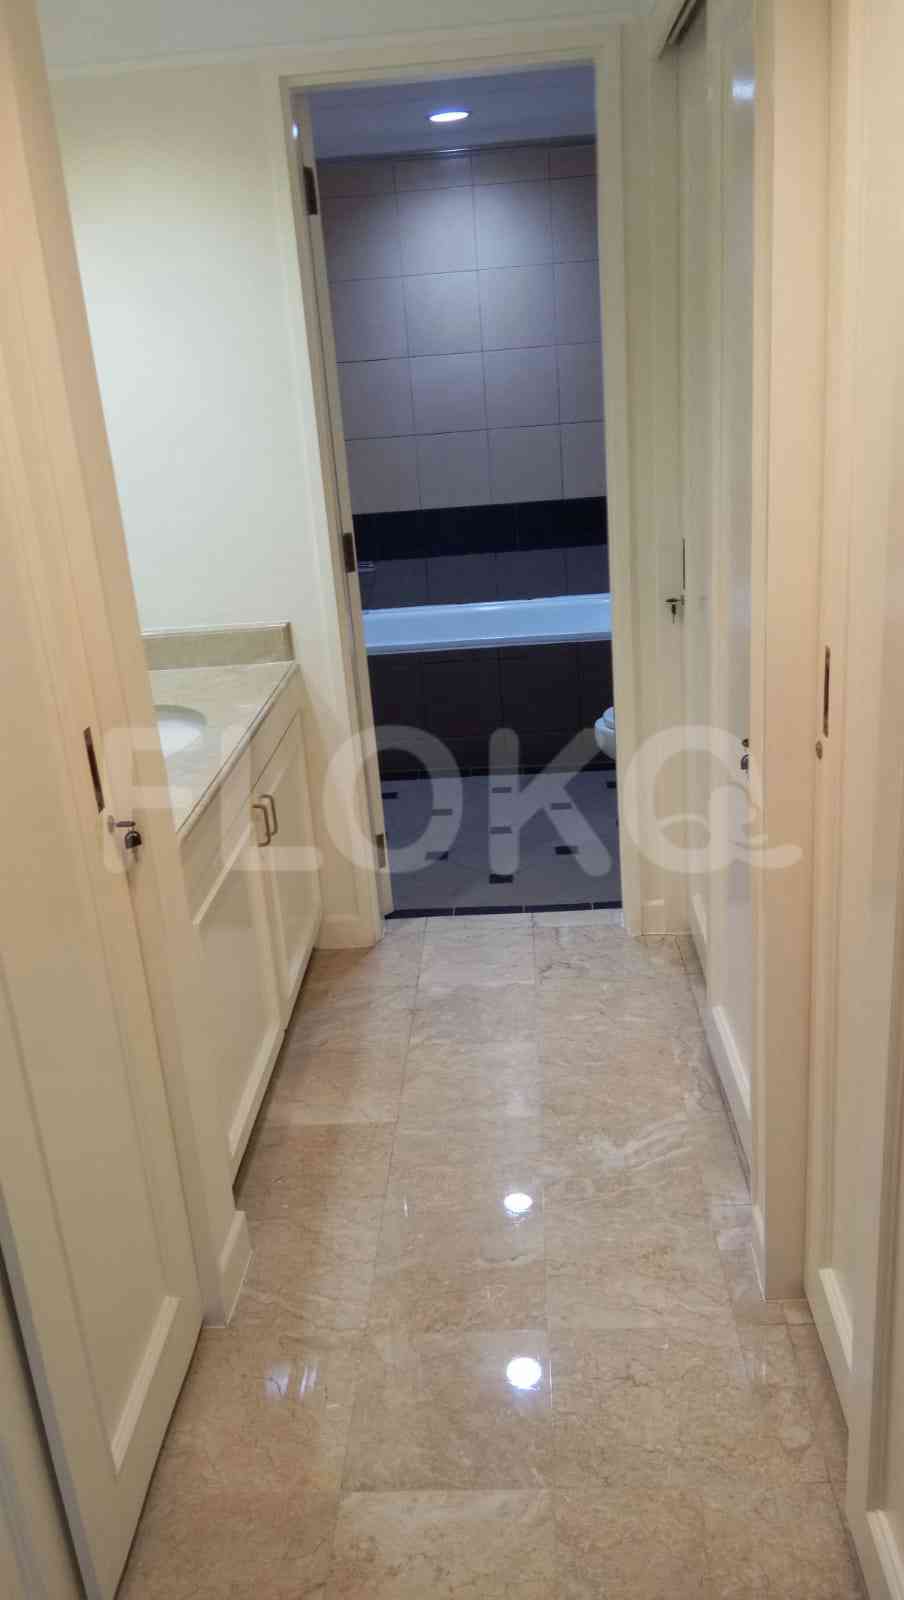 4 Bedroom on 10th Floor for Rent in Pondok Indah Golf Apartment - fpo99f 7